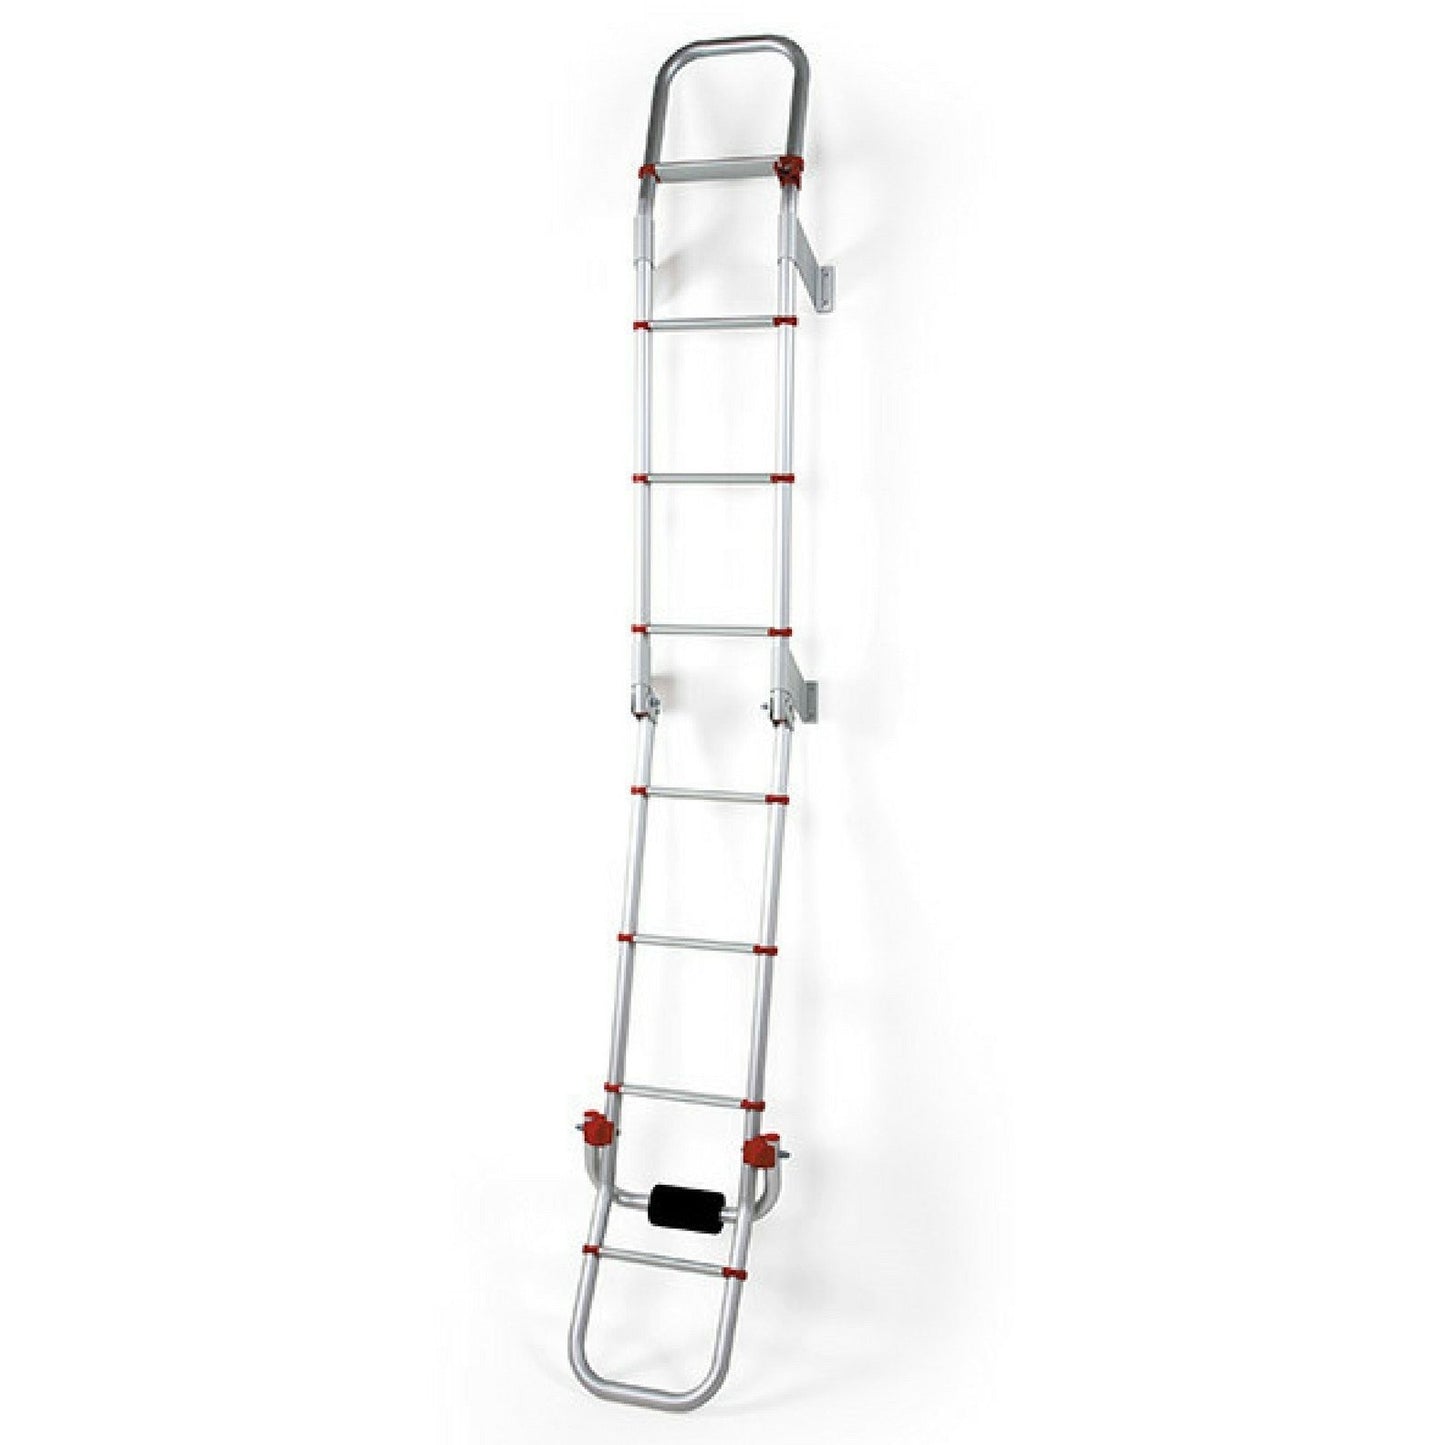 Fiamma Deluxe 8 Folding Motorhome Ladder made by Fiamma. A Ladders sold by Quality Caravan Awnings